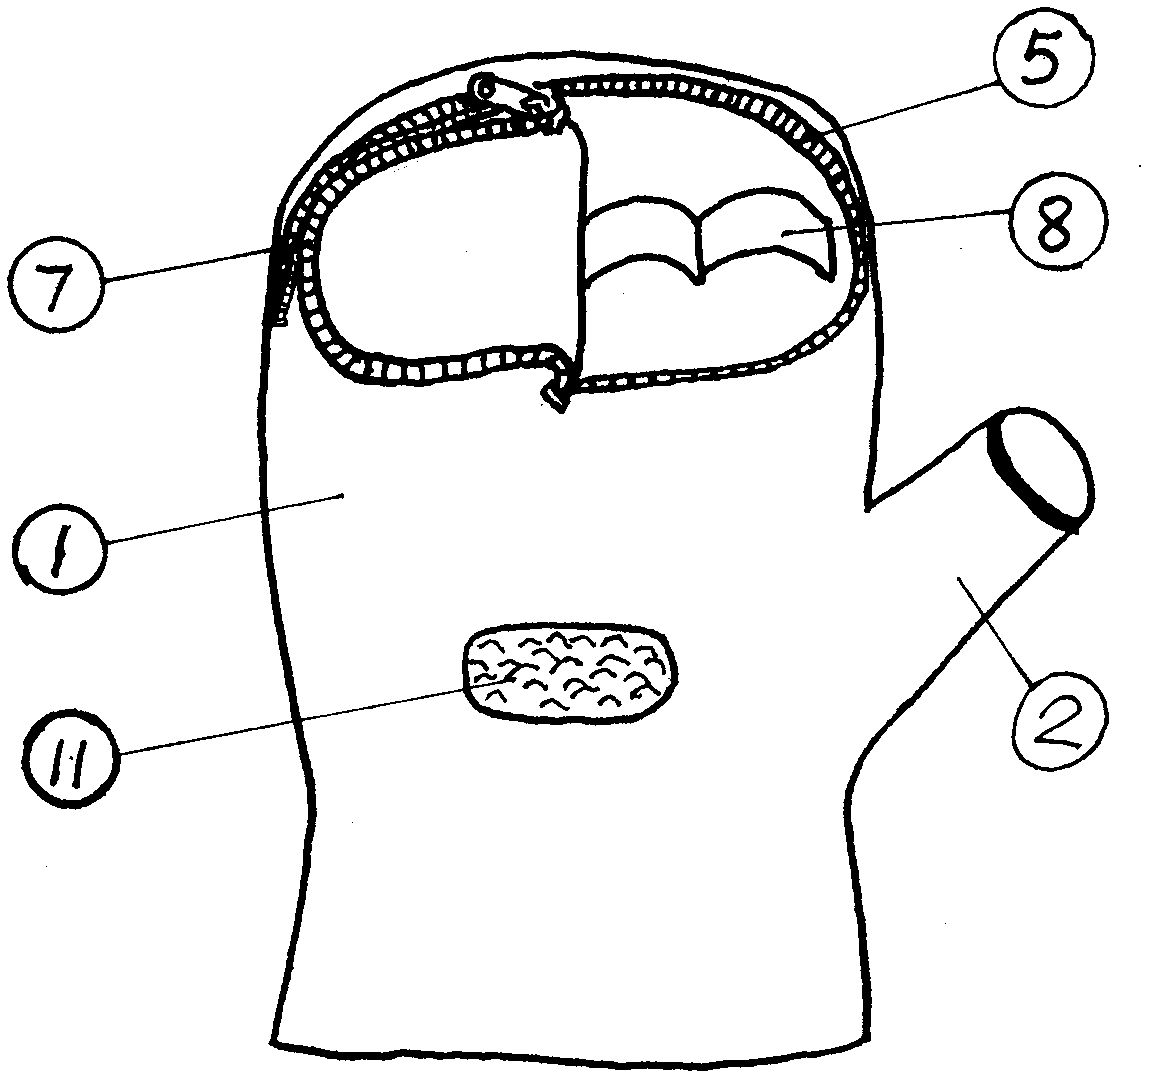 Glove with finger exposing seams and zippers